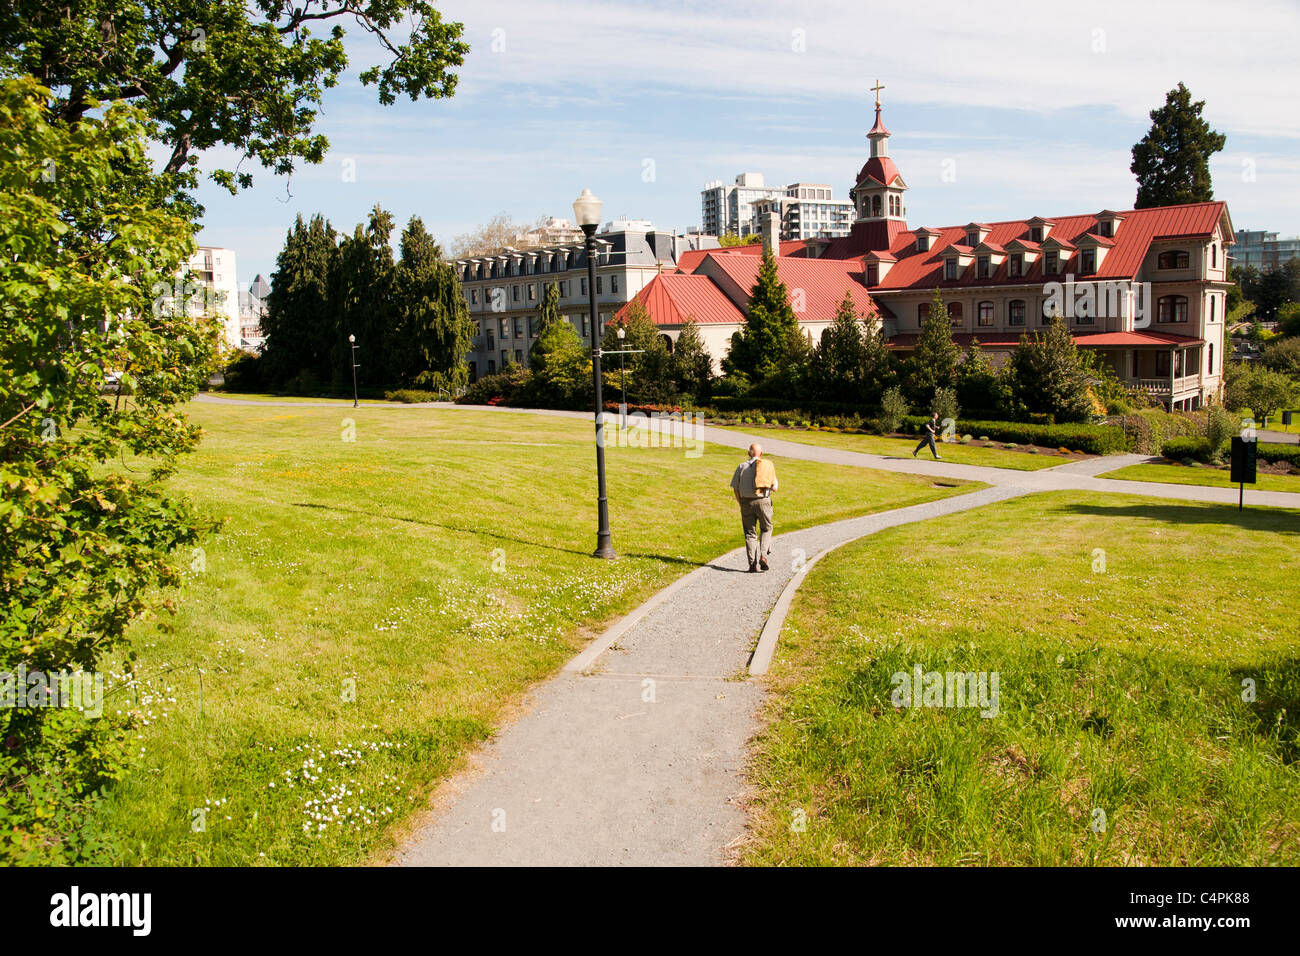 Beacon Hill Park and St. Ann's Academy. Victoria, Vancouver Island, British Columbia, Canada. Stock Photo